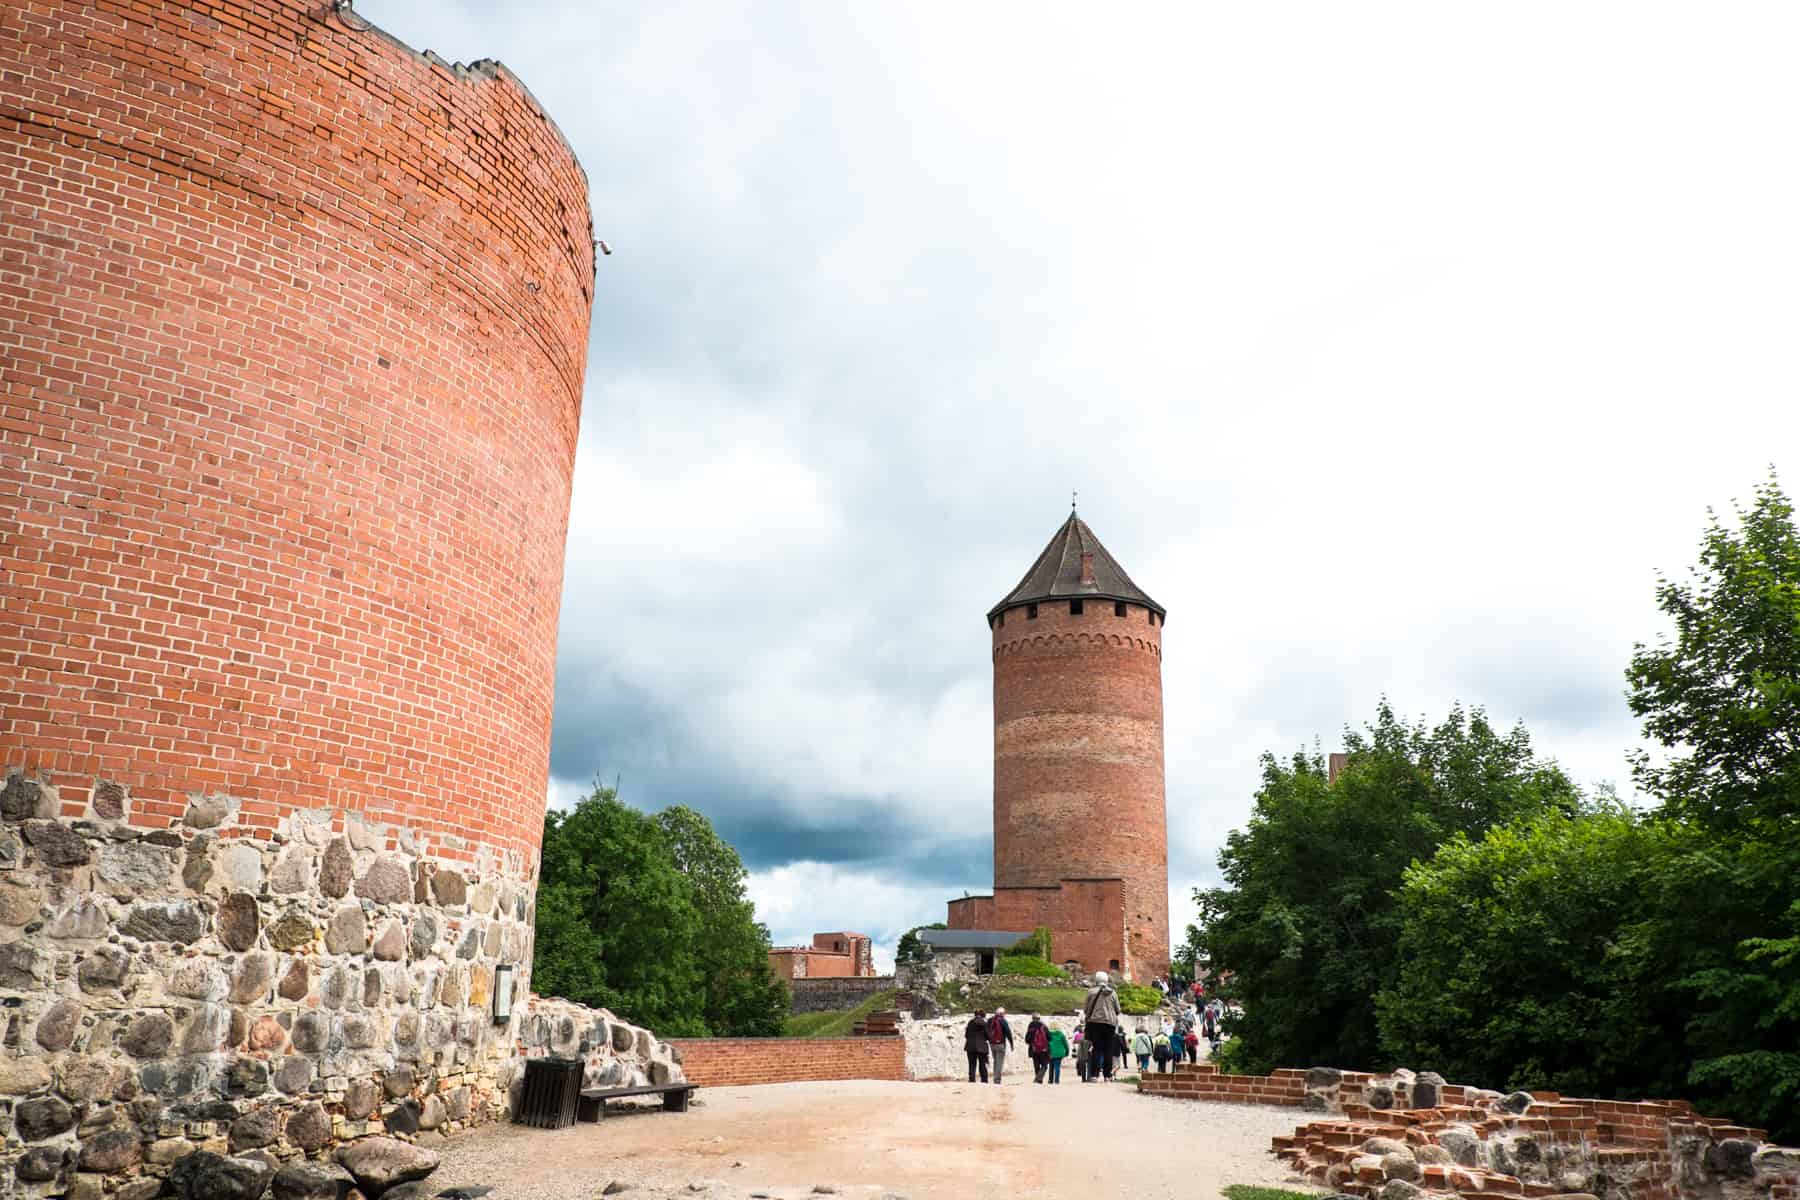 Two orange turrets, one with a silver pointed roof that people are walking towards, are the remains of Turaida Castle in Latvia.